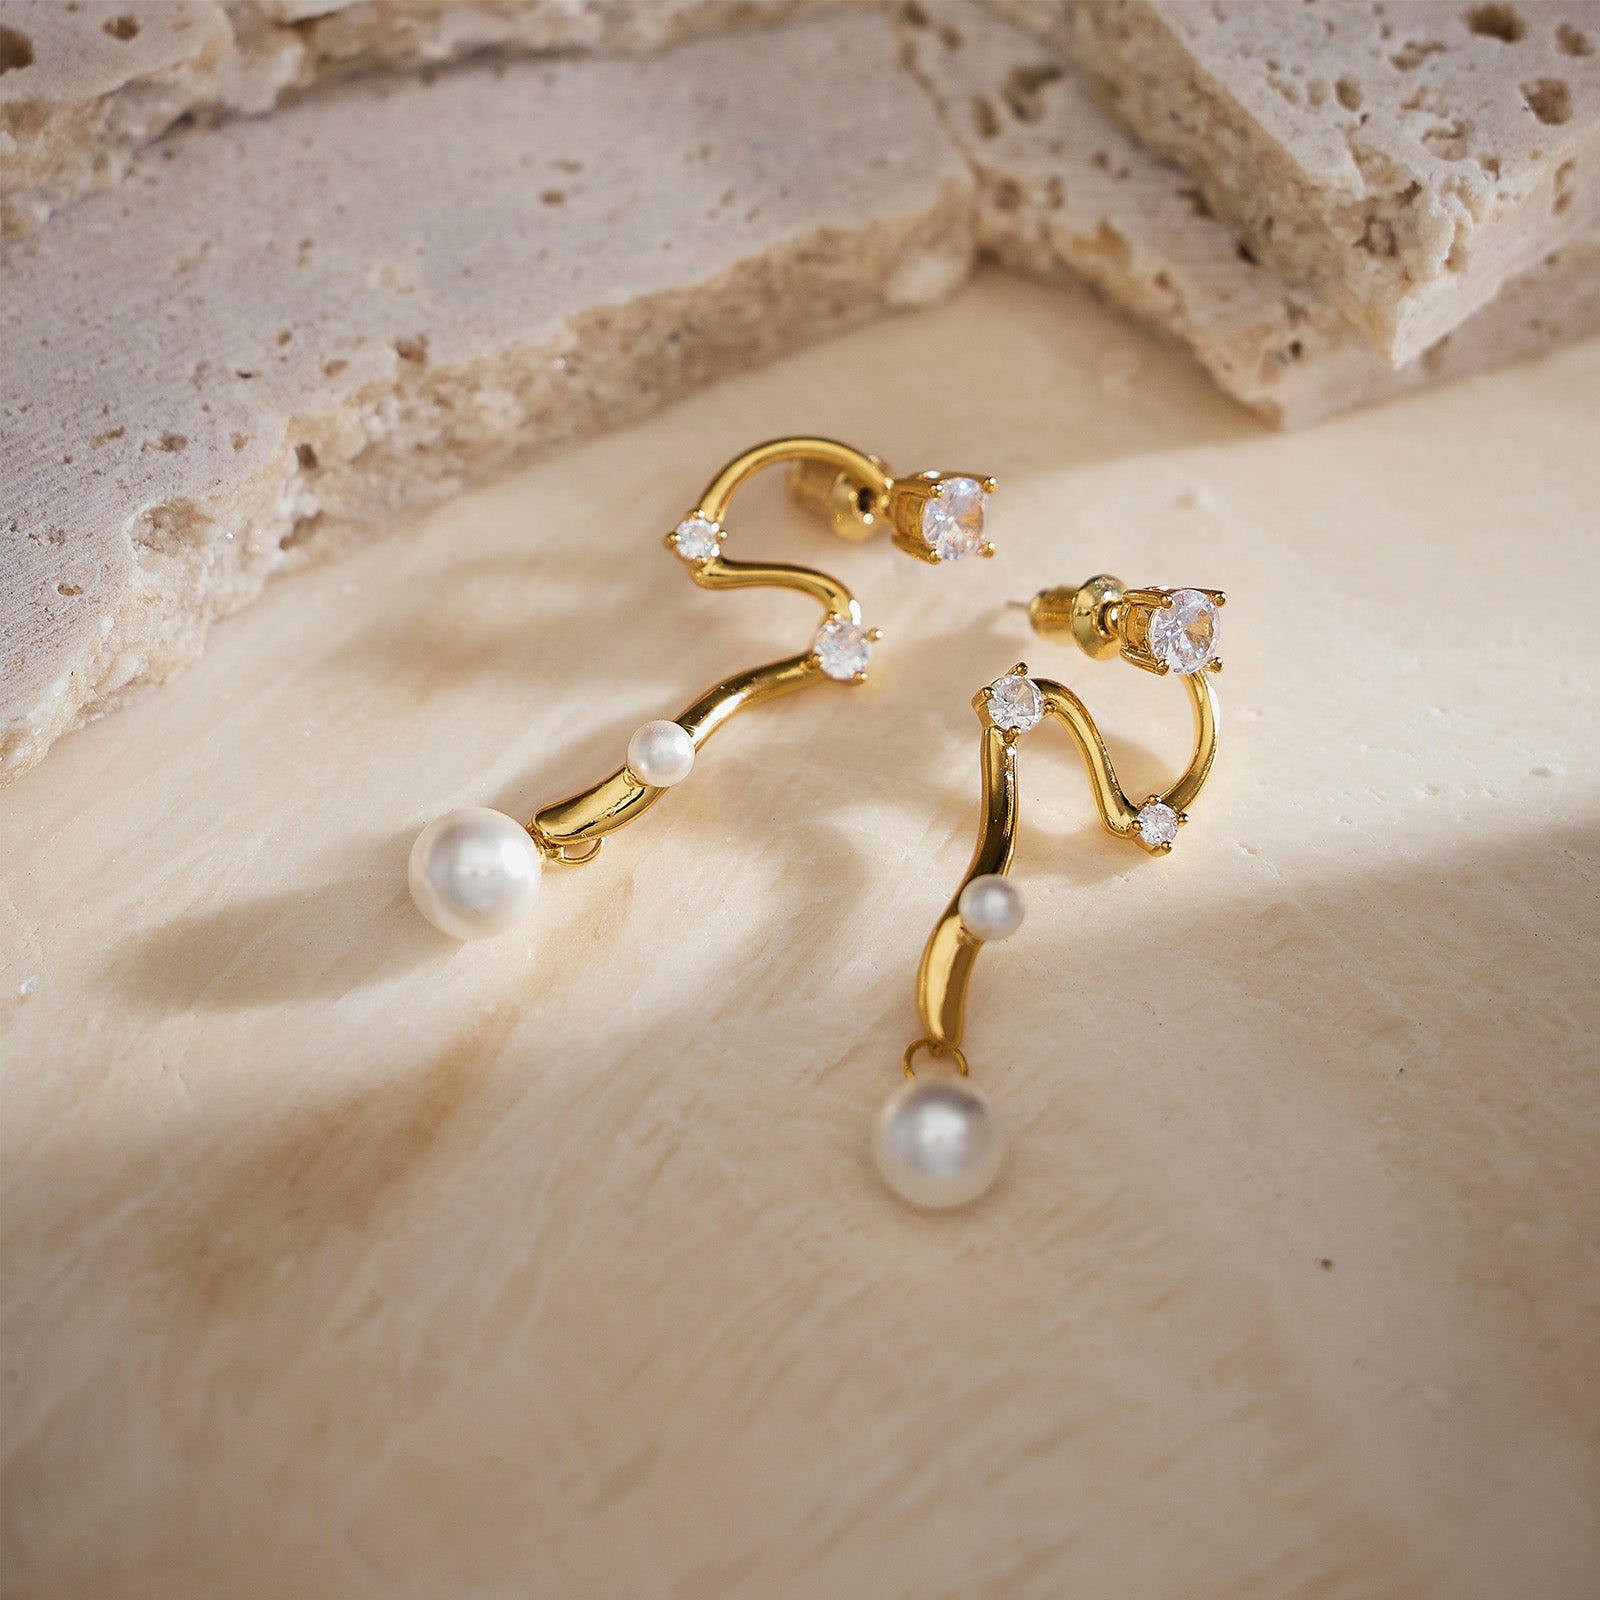 Serpent Pearl Drop Earrings, the serpentine embrace adds a hint of allure to these earrings, creating a captivating and enchanting accessory for a glamorous look